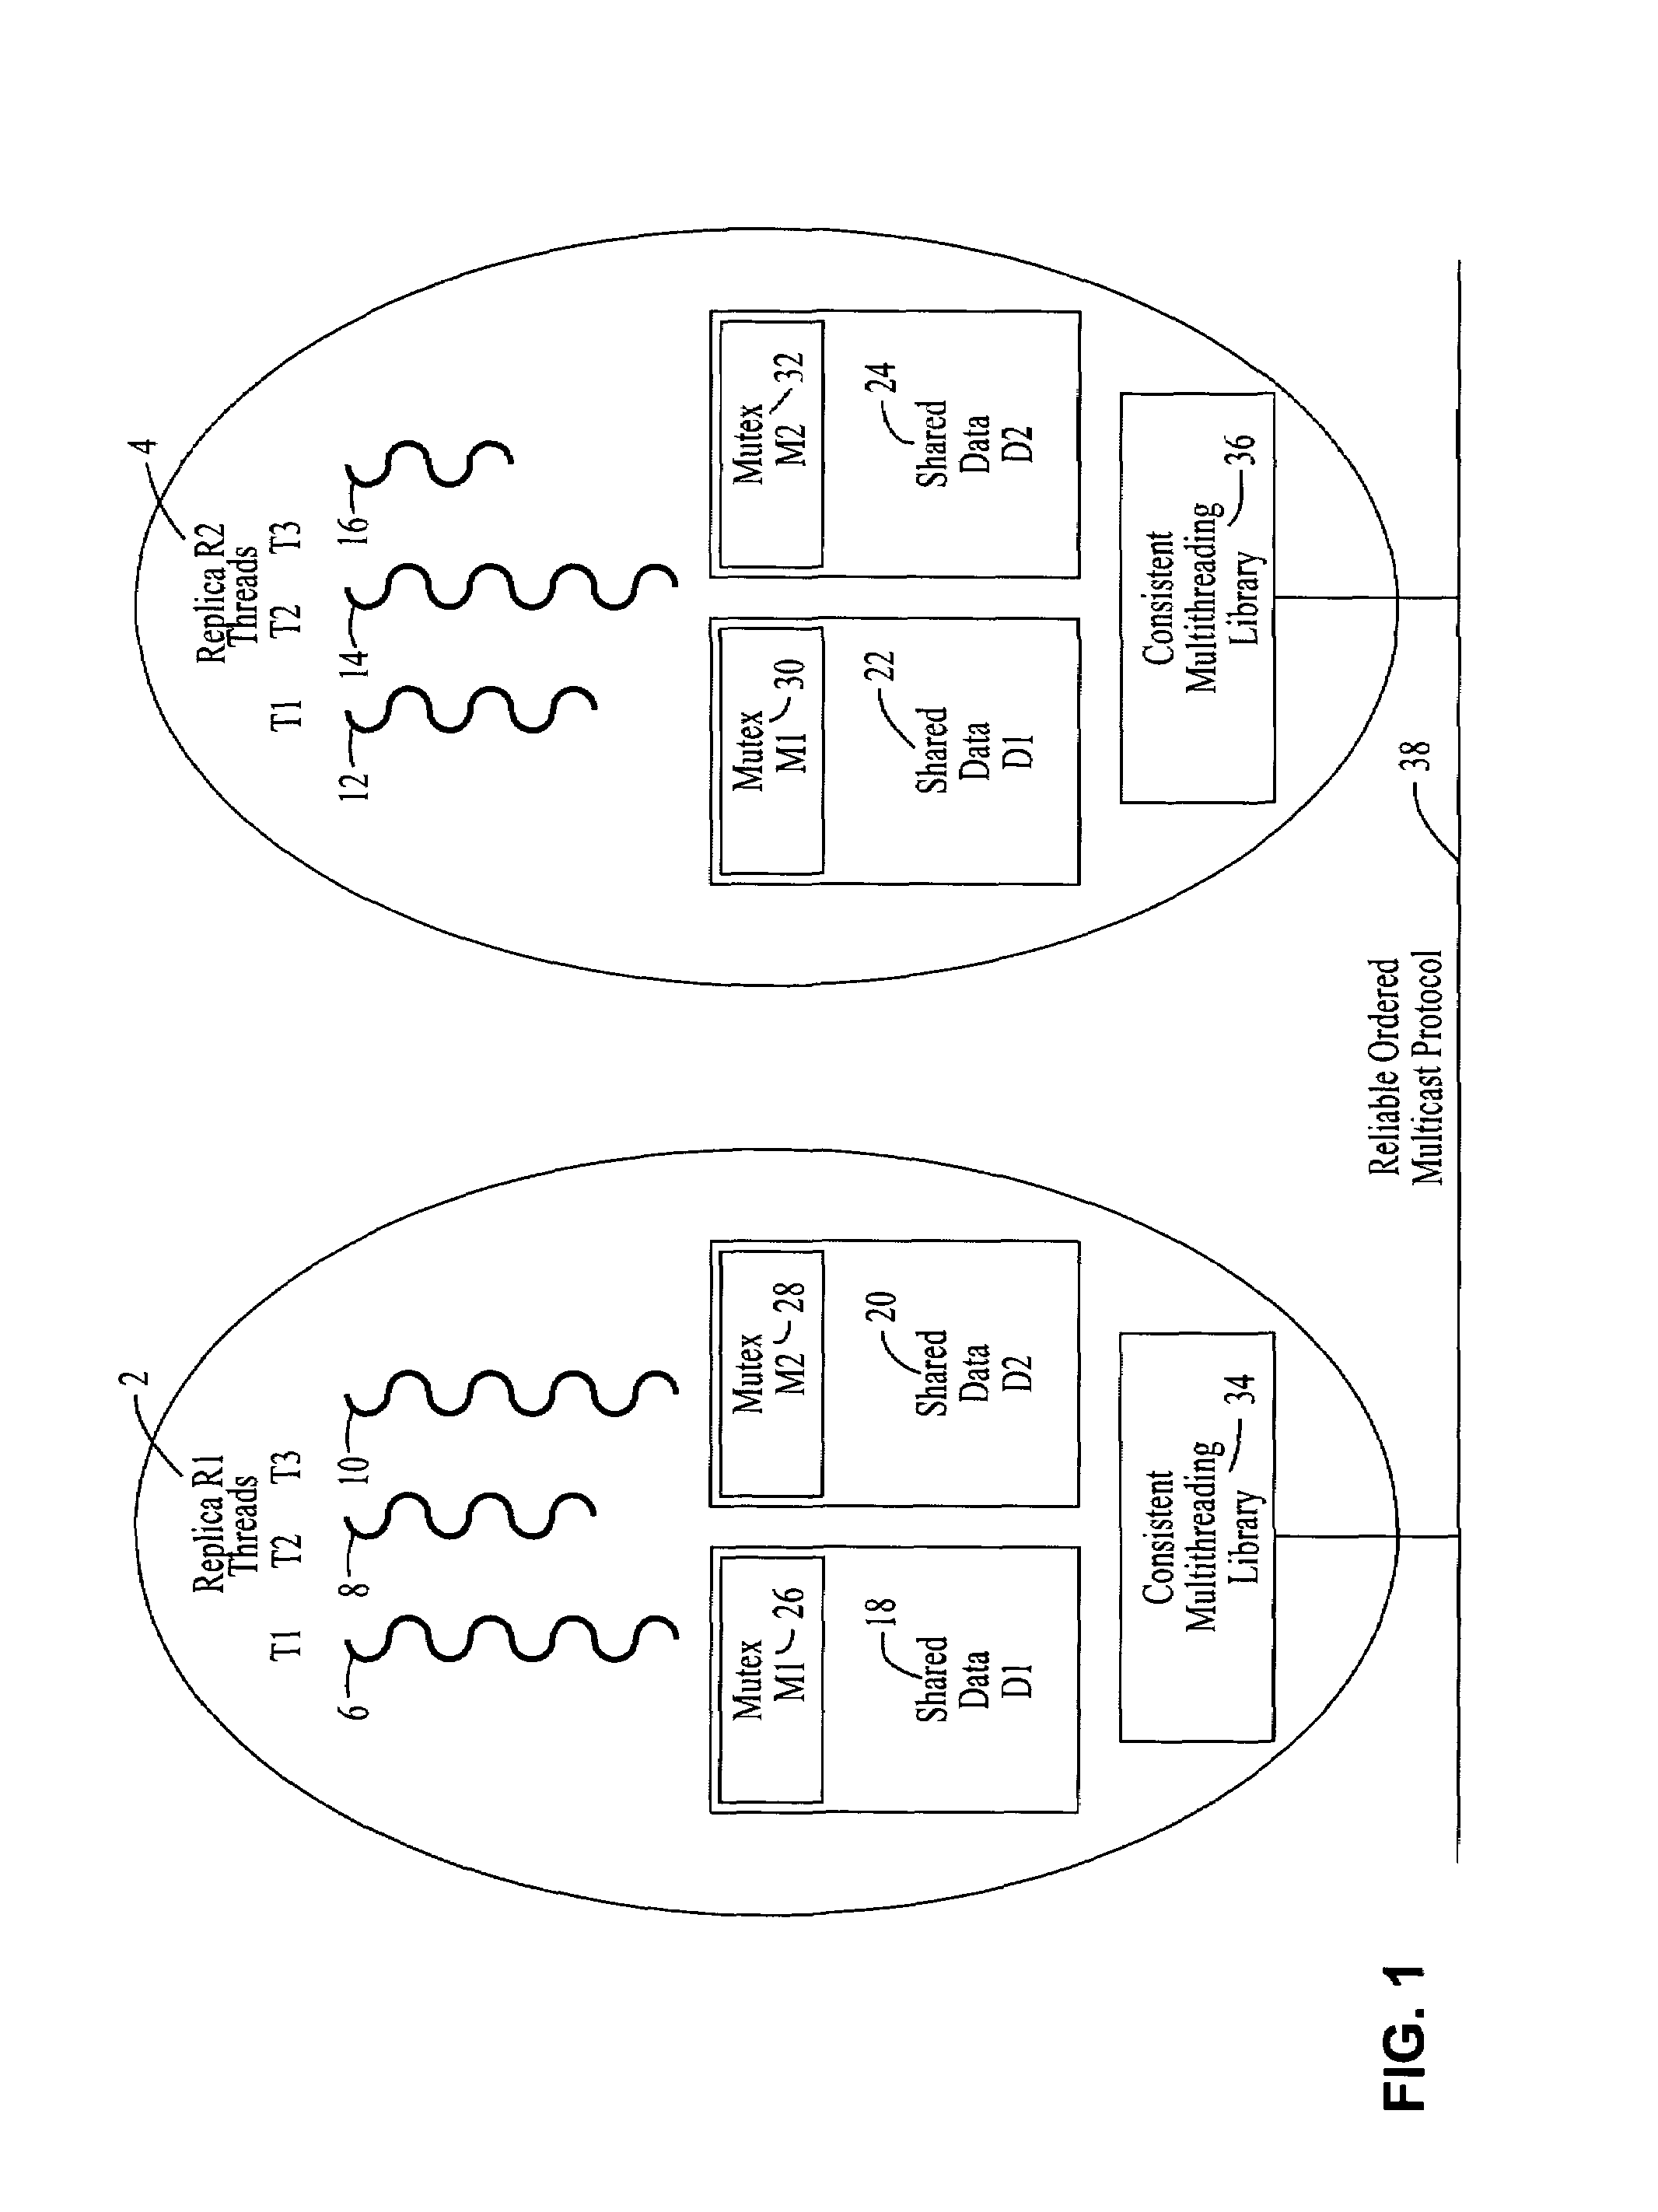 Consistent asynchronous checkpointing of multithreaded application programs based on active replication